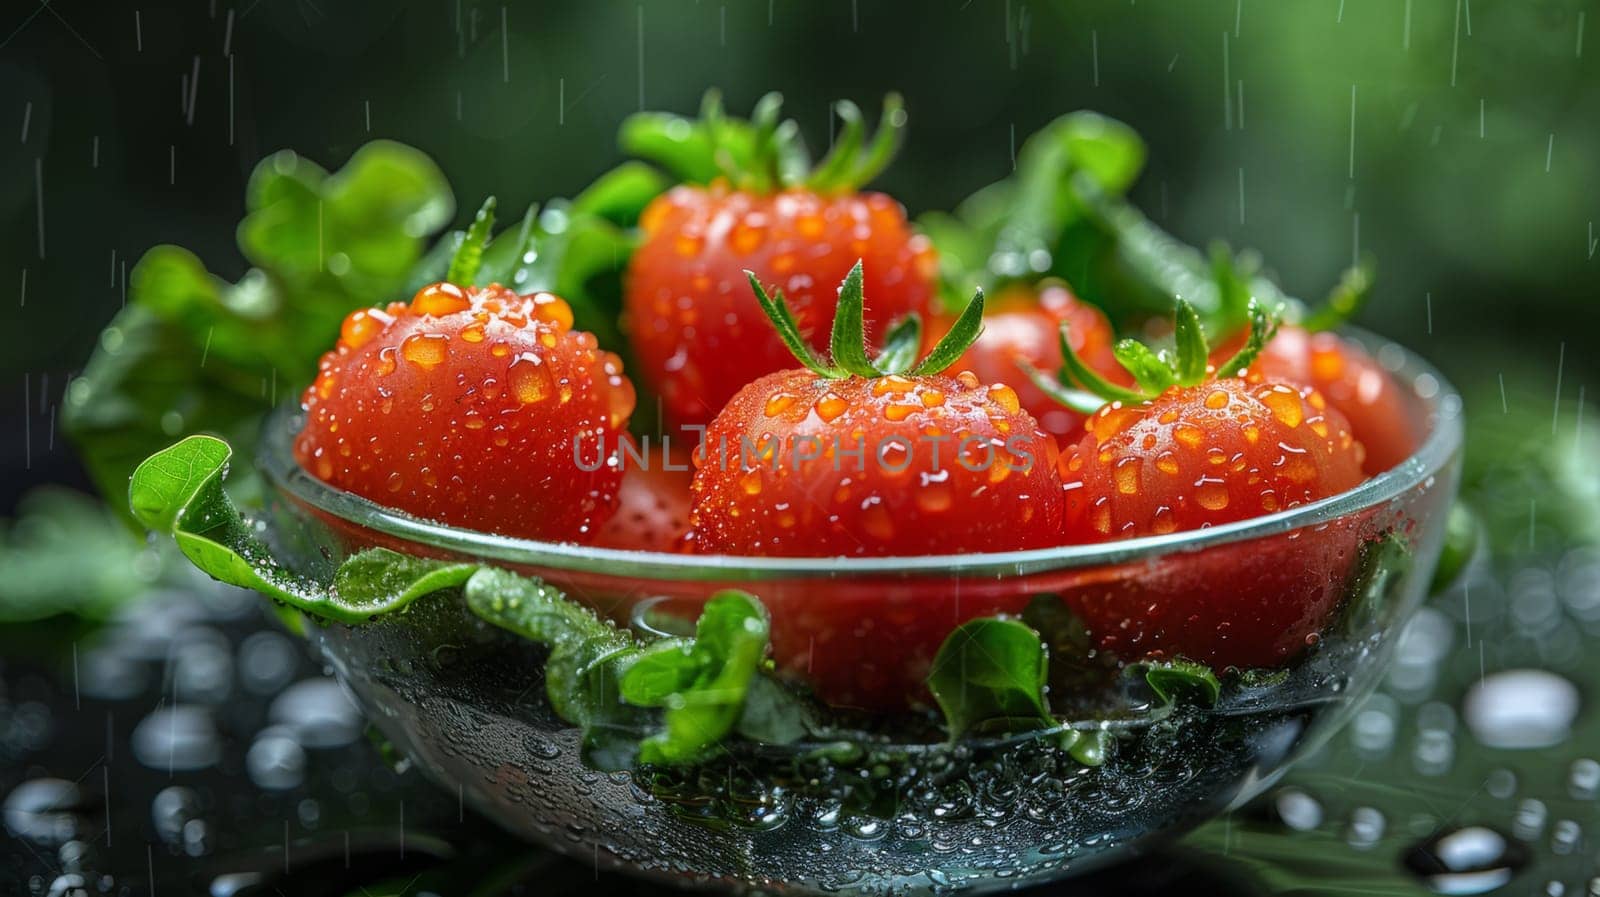 A bowl of strawberries with water droplets on them in a glass, AI by starush